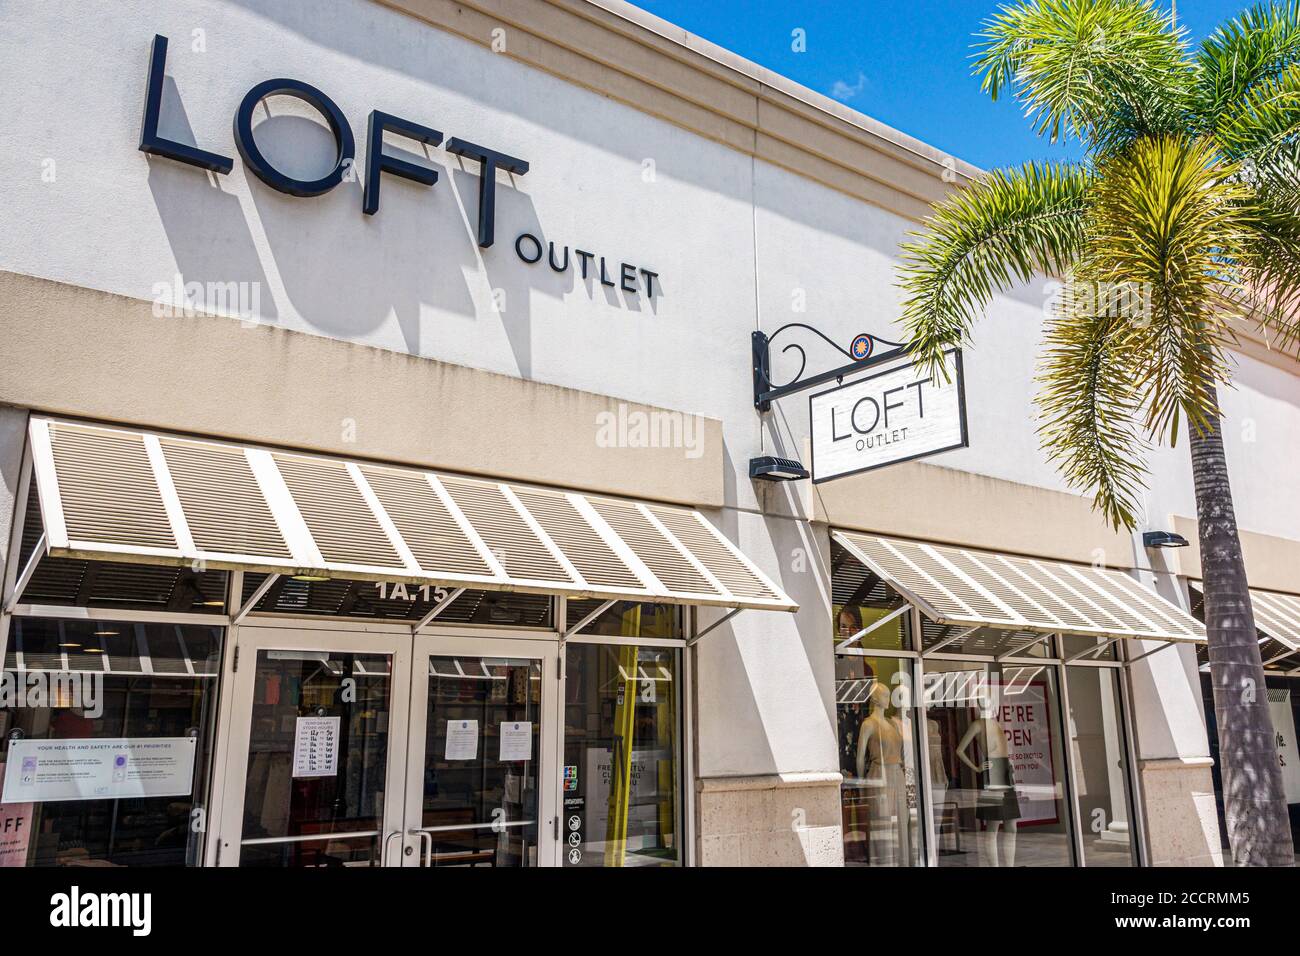 Orlando Florida,Premium Outlets,shopping shopper shoppers shop shops market  markets marketplace buying selling,retail store stores business businesses  Stock Photo - Alamy